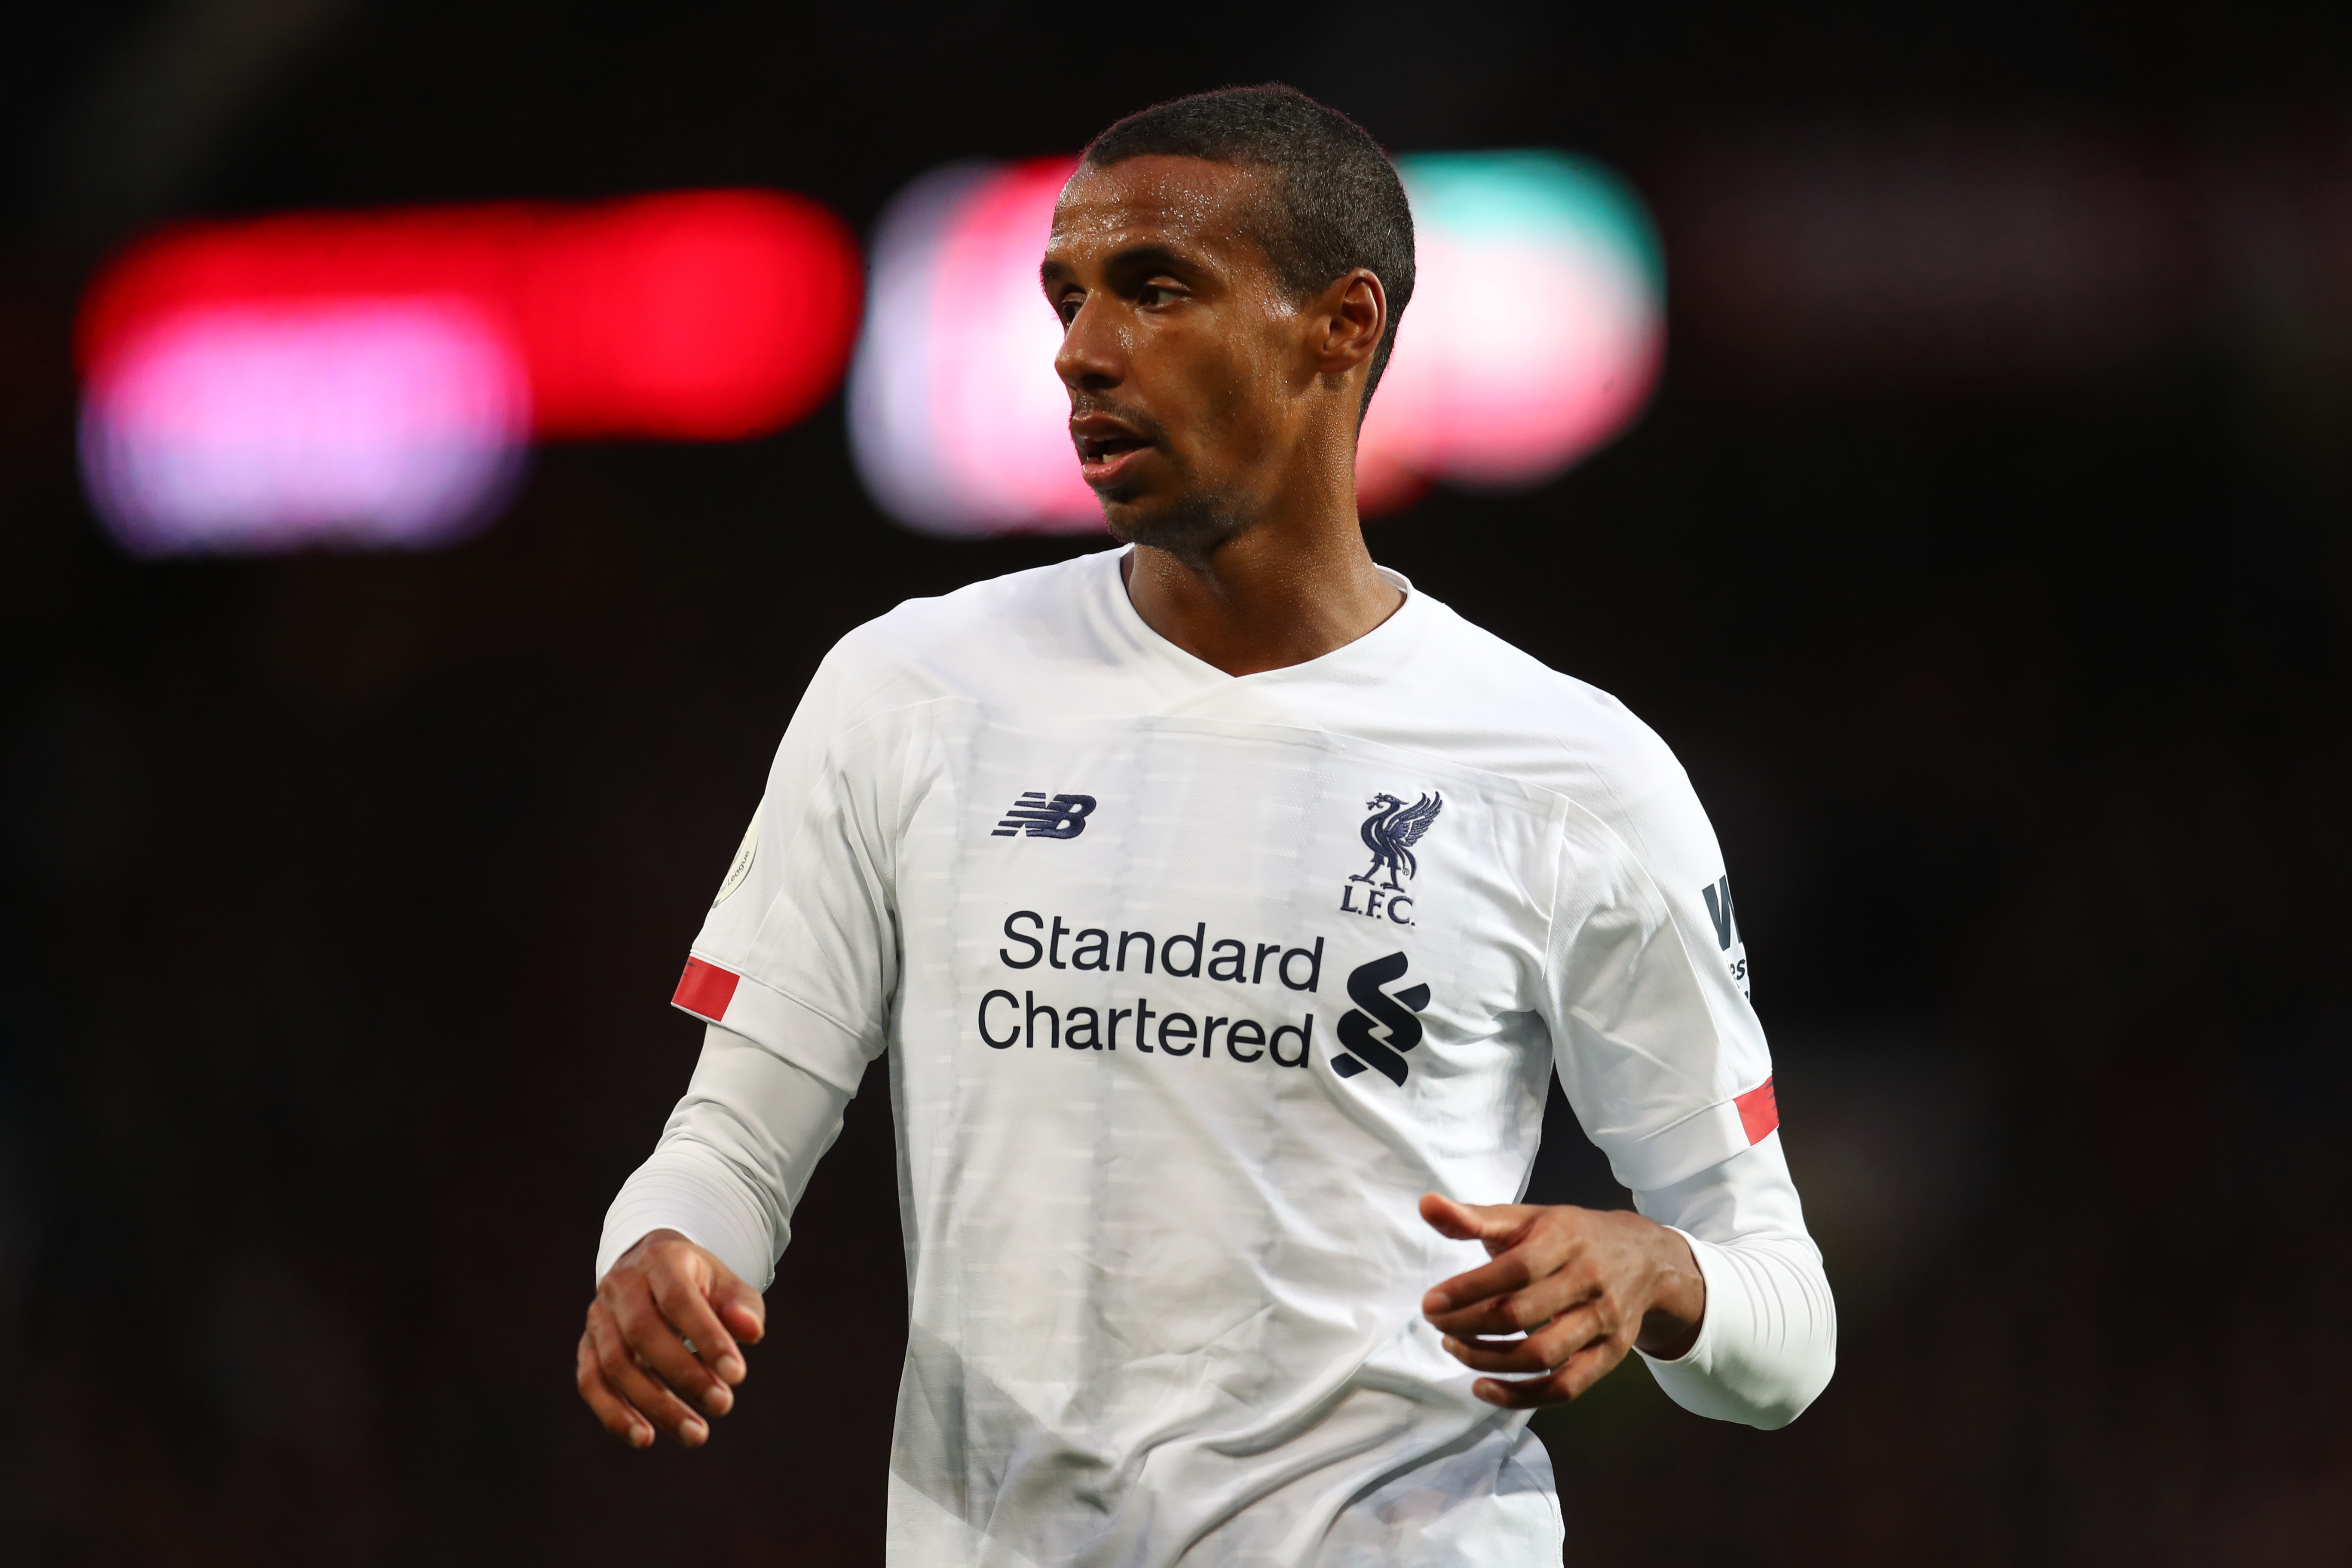 Not a great start to 2020/21 for Matip. (Photo by Catherine Ivill/Getty Images)